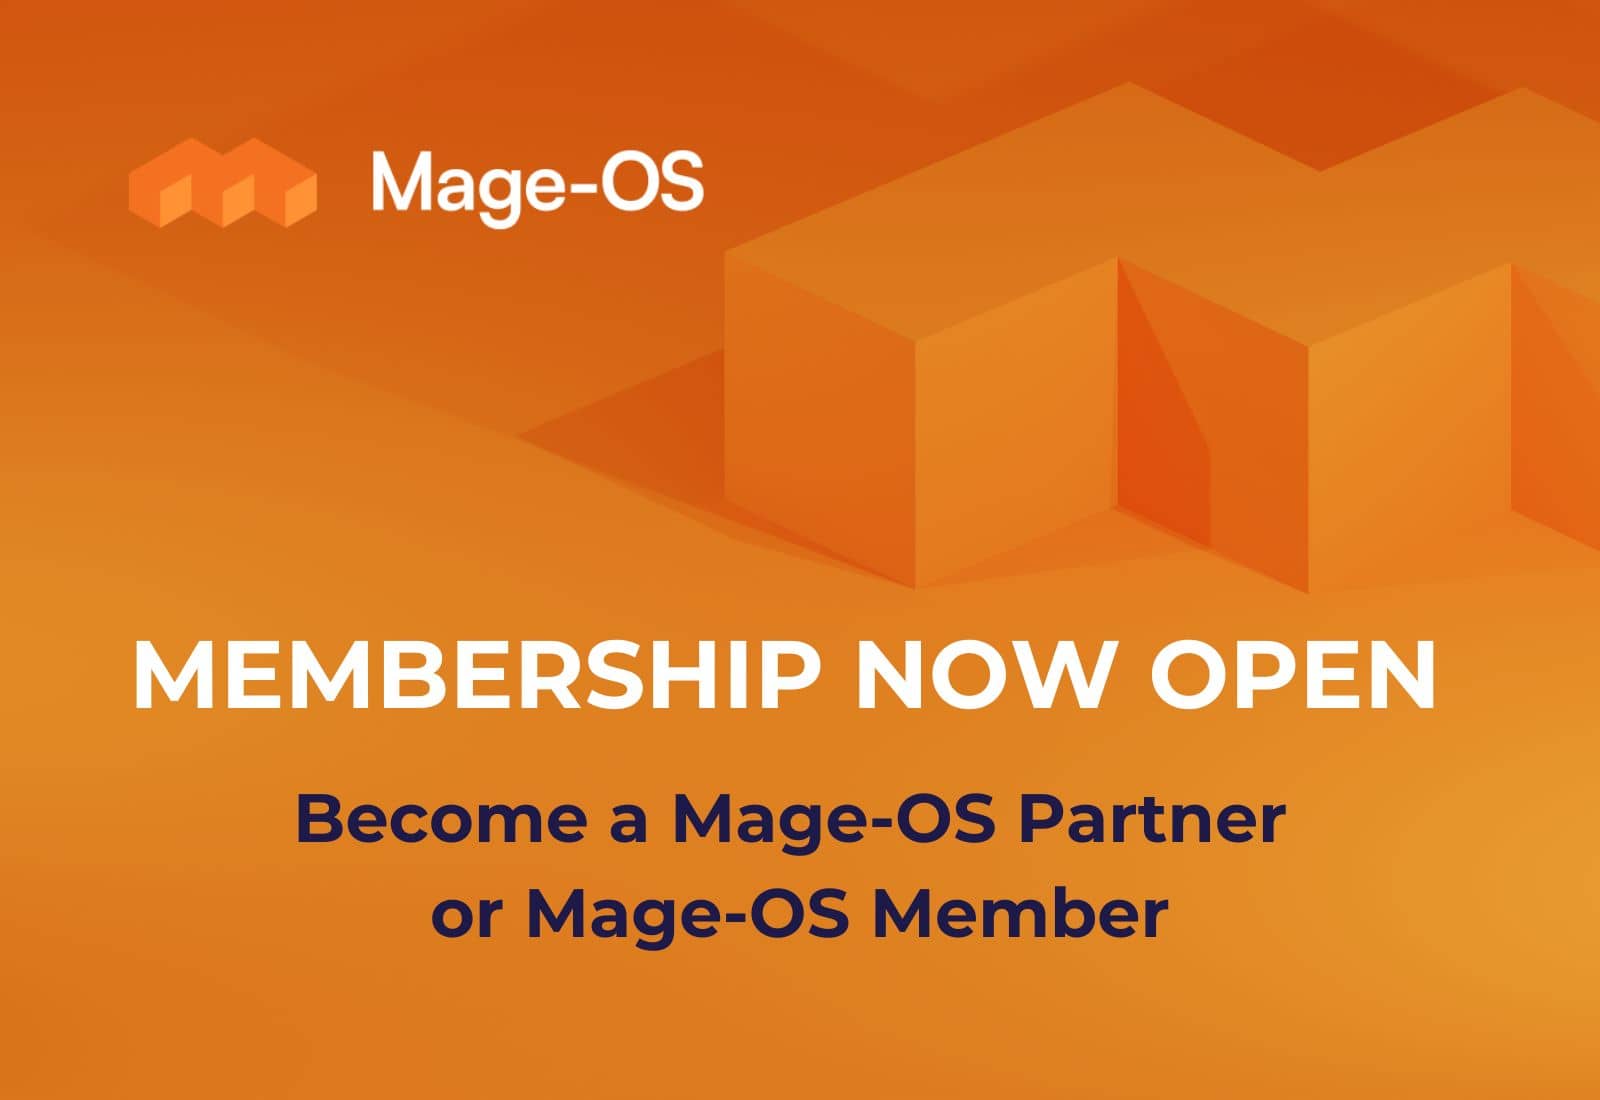 Mage-OS Membership Now Open